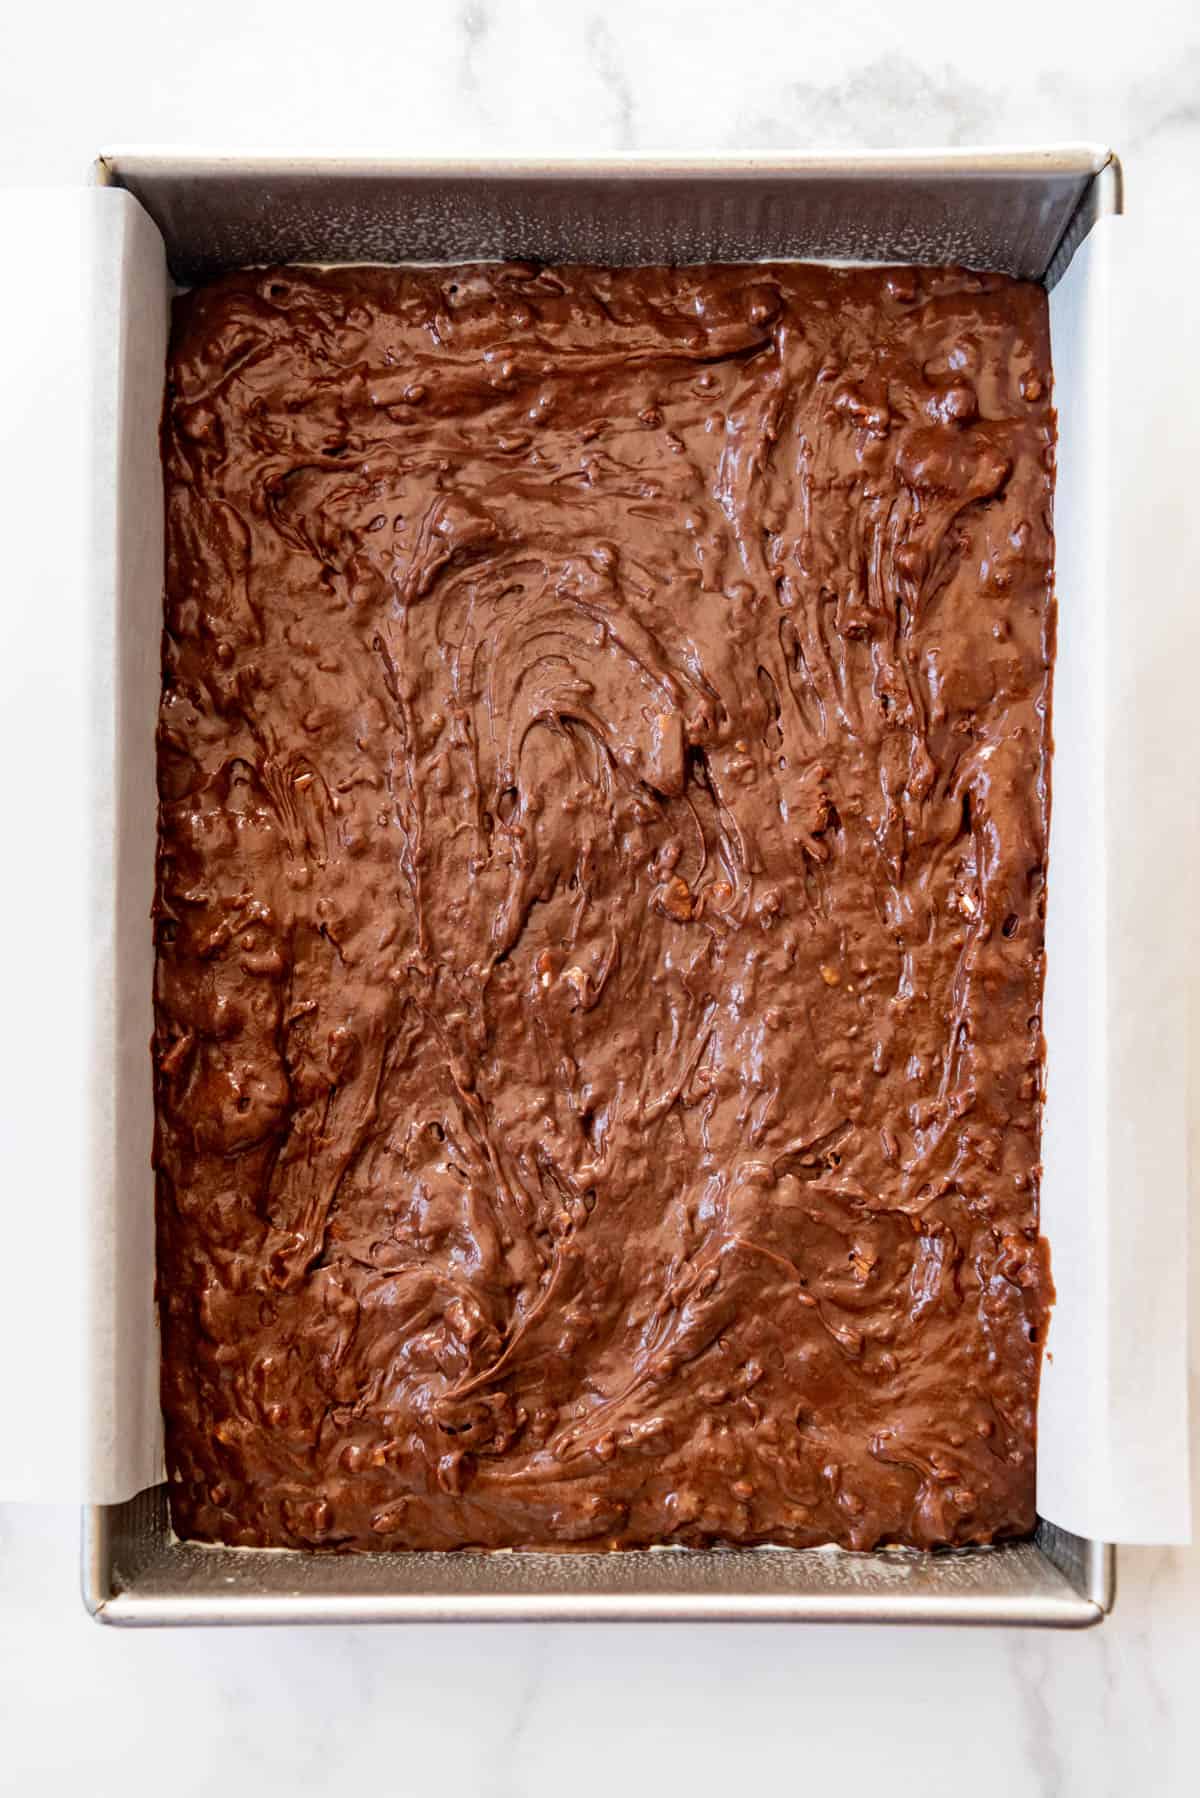 Brownie batter spread in a 9x13-inch pan with a parchment paper sling.